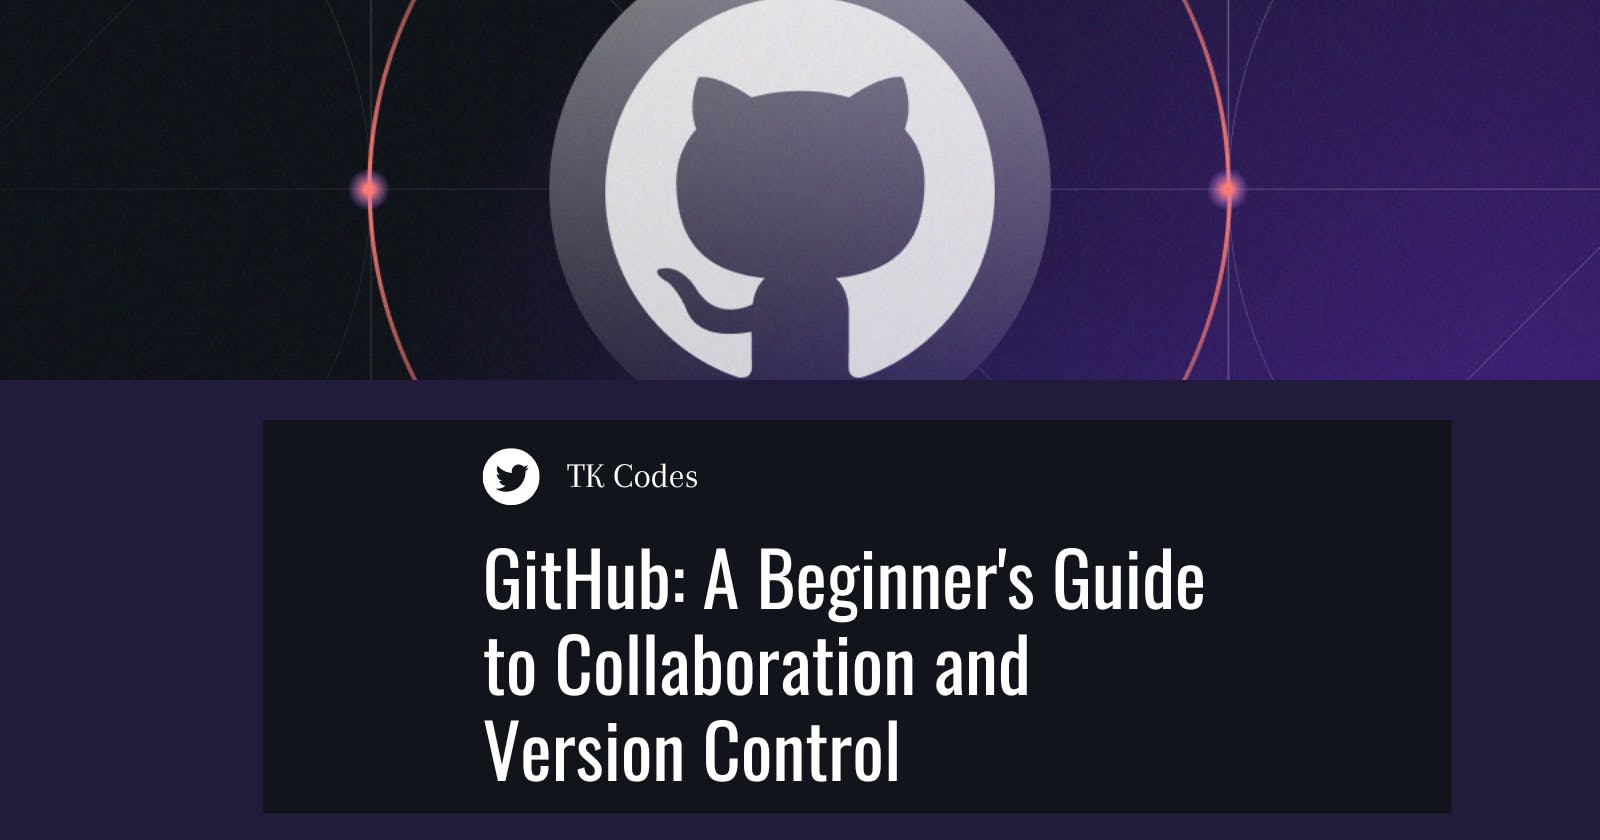 GitHub: A Beginner's Guide to Collaboration and Version Control